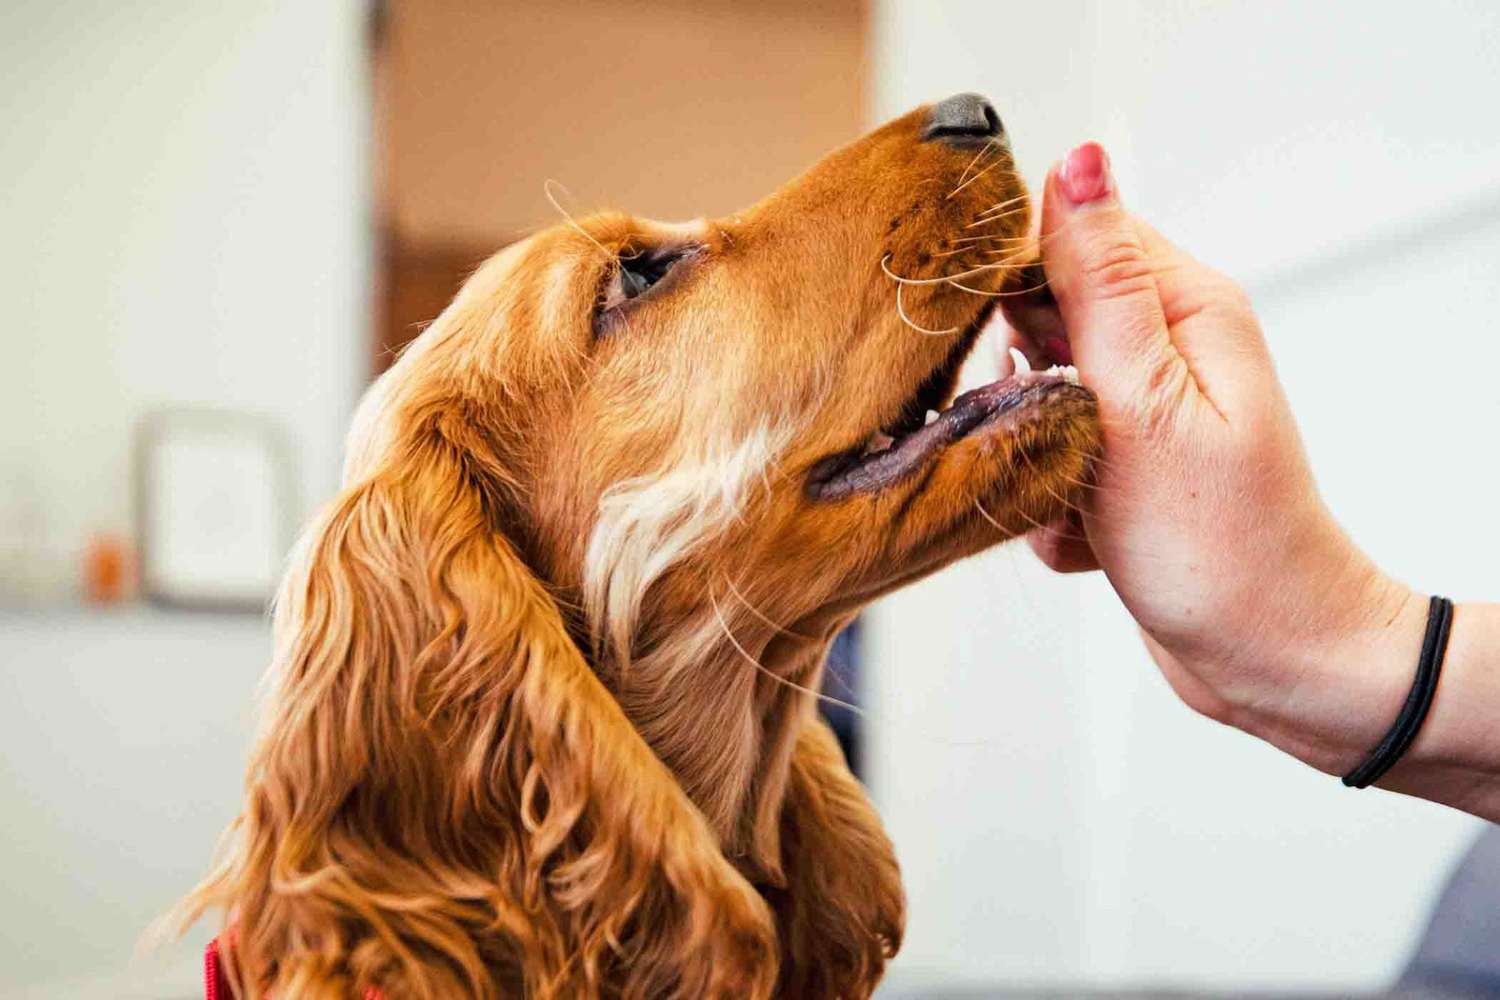 What Can I Give My Dog For Pain? Meds, Supplements, and Therapy Can Help |  Daily Paws